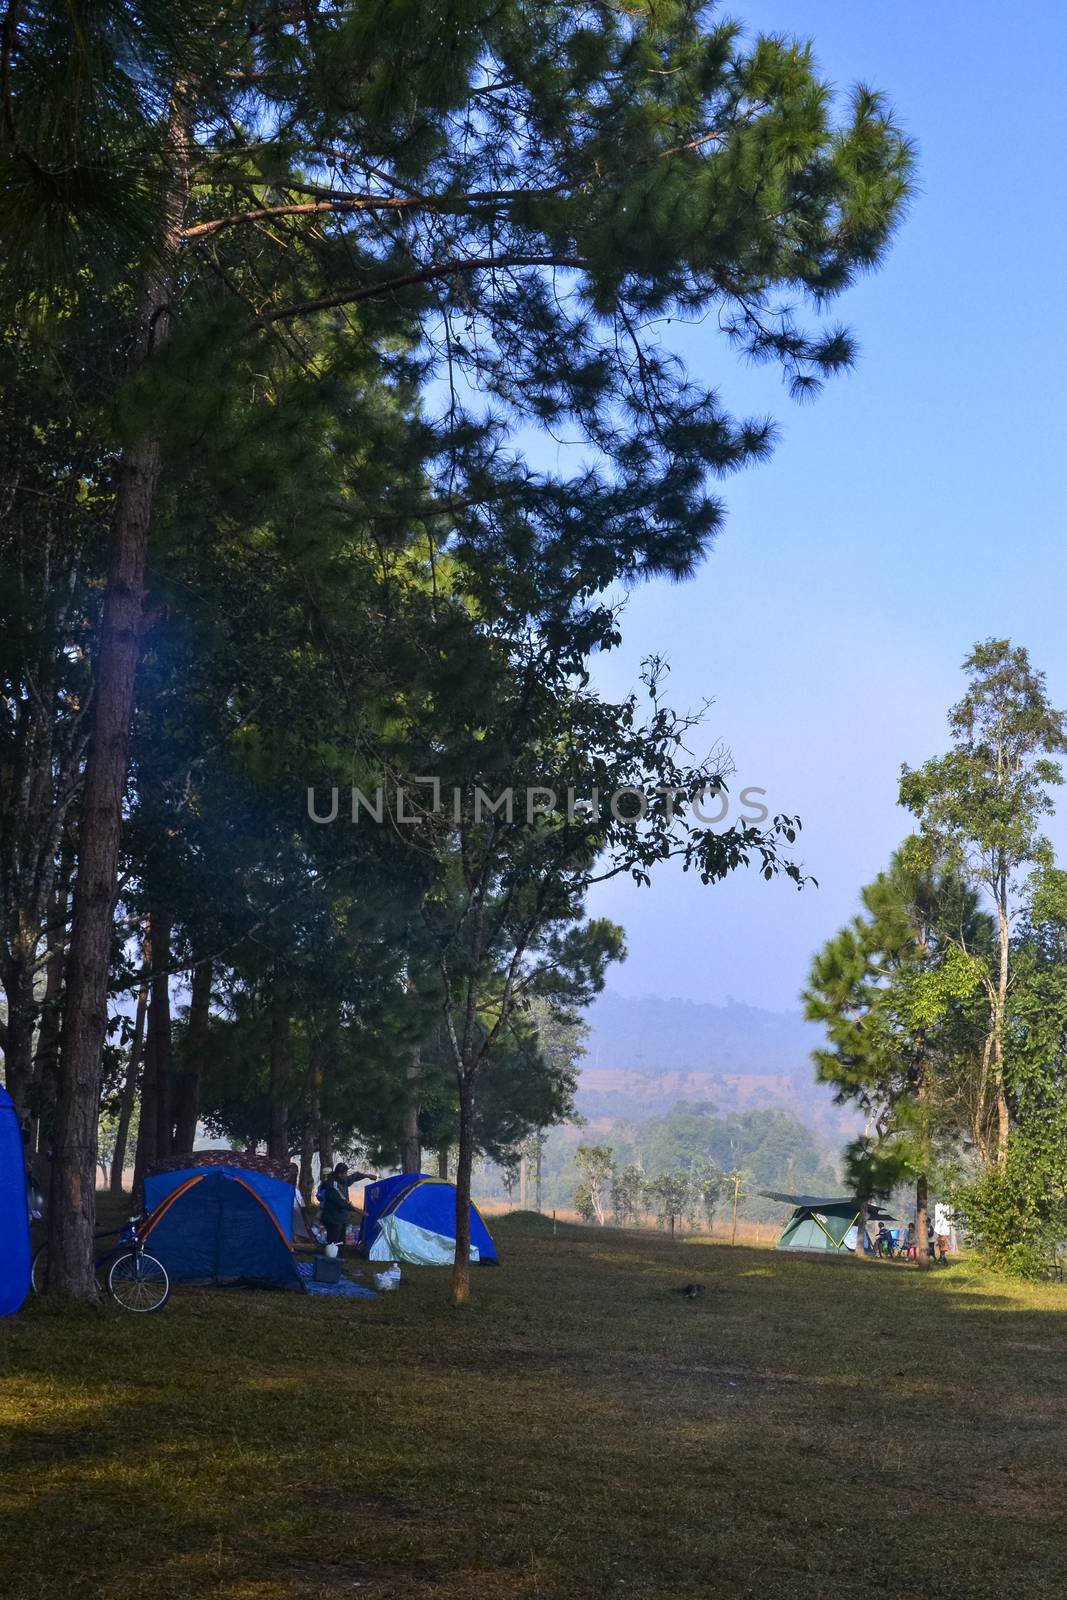 Camping in Salangluang Nationalpark. by gammiez